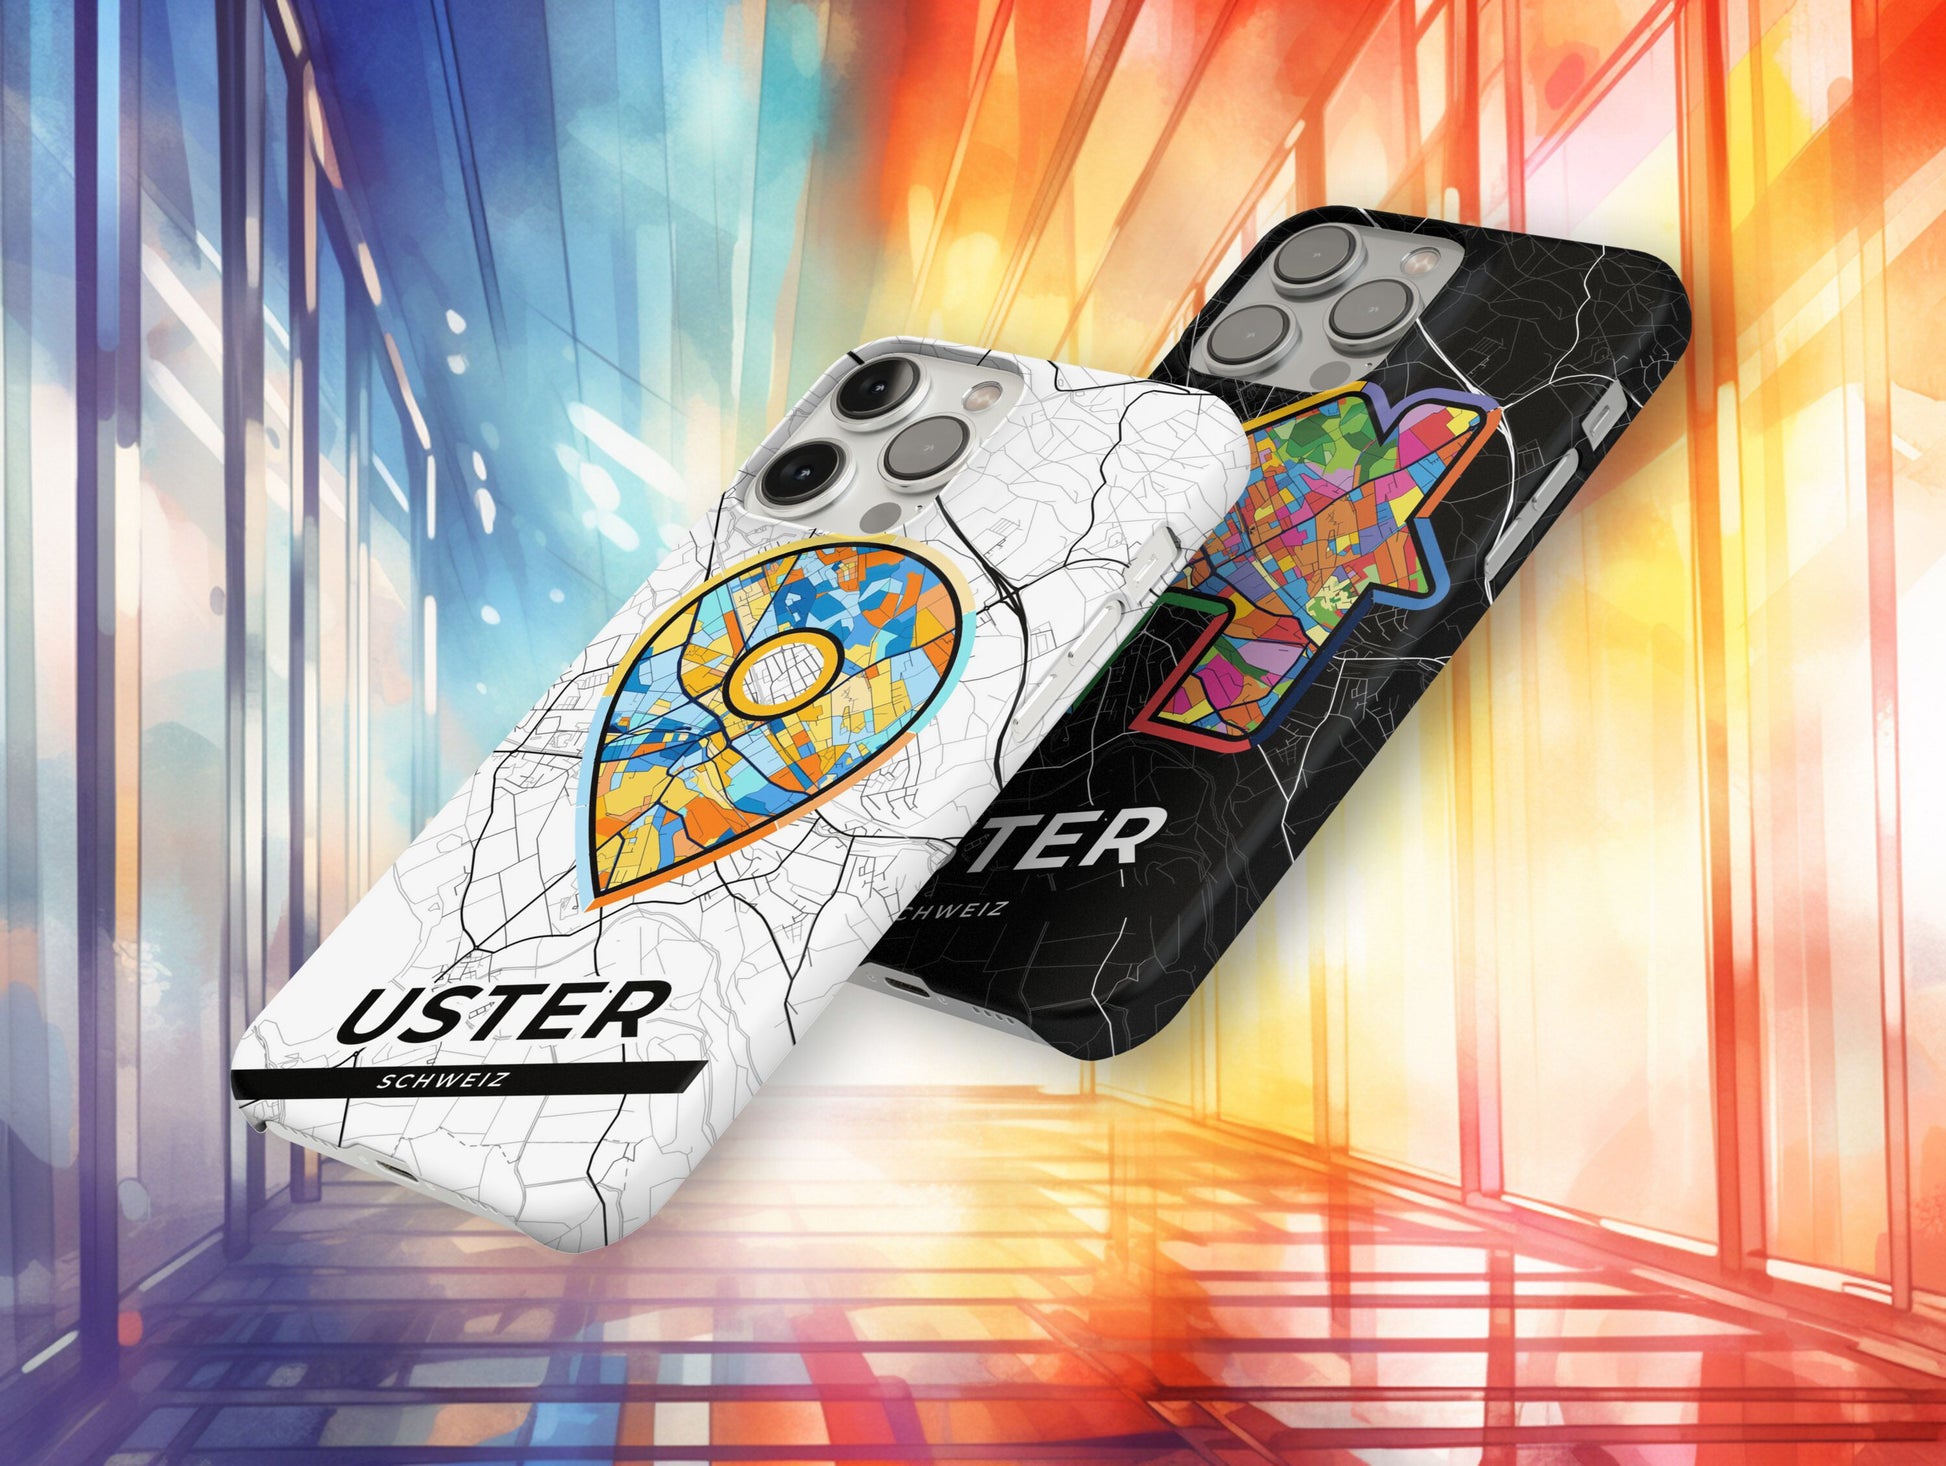 Uster Switzerland slim phone case with colorful icon